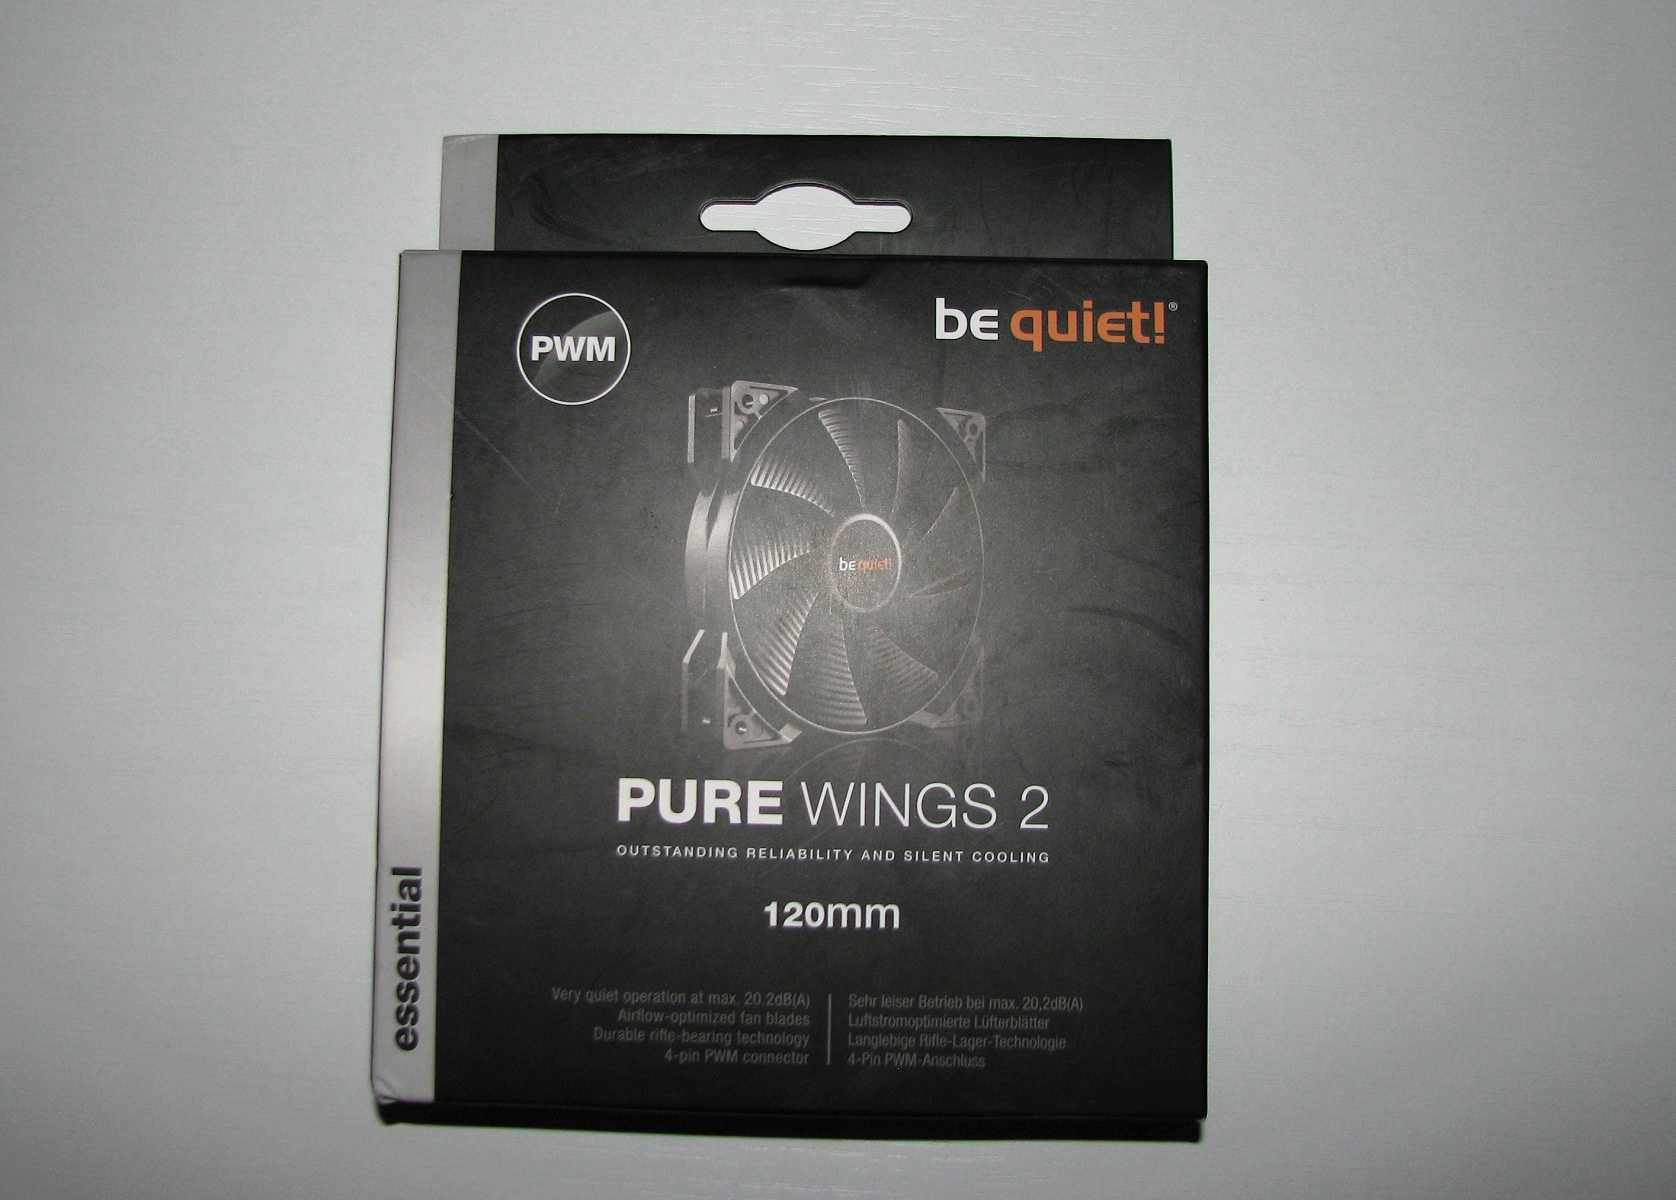 Be quiet! pure wings 2 (bl039)